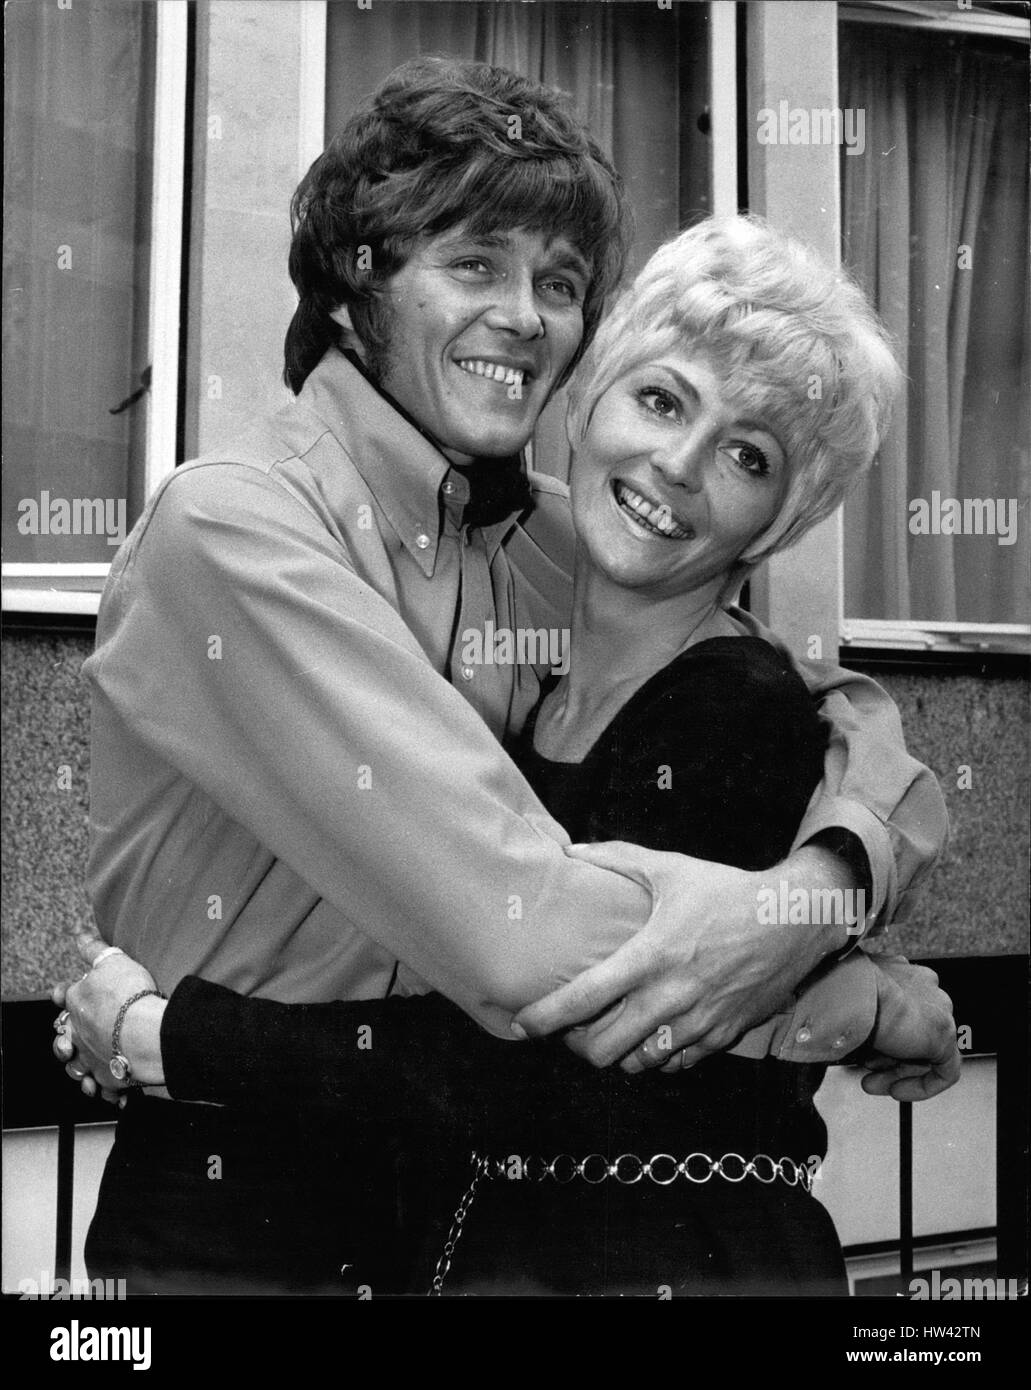 Jun. 06, 1969 - Billy Fury and His Wife of a few weeks attend reception to launch his new disc: Pop singer Billy Fury was accompanied by his wife, the former fashion model Judith Hall when he married recently, when he attended a reception at E.M.I&gt; offices to launch his new disc Ã¢â‚¬Å“I call for my roseÃ¢â‚¬Â which will be released on July 4th. The couple have just returned from a Majerca Honeymoon. Photo shows Billy Fury and his wife Judith pictures at todays reception. (Credit Image: © Keystone Press Agency/Keystone USA via ZUMAPRESS.com) Stock Photo